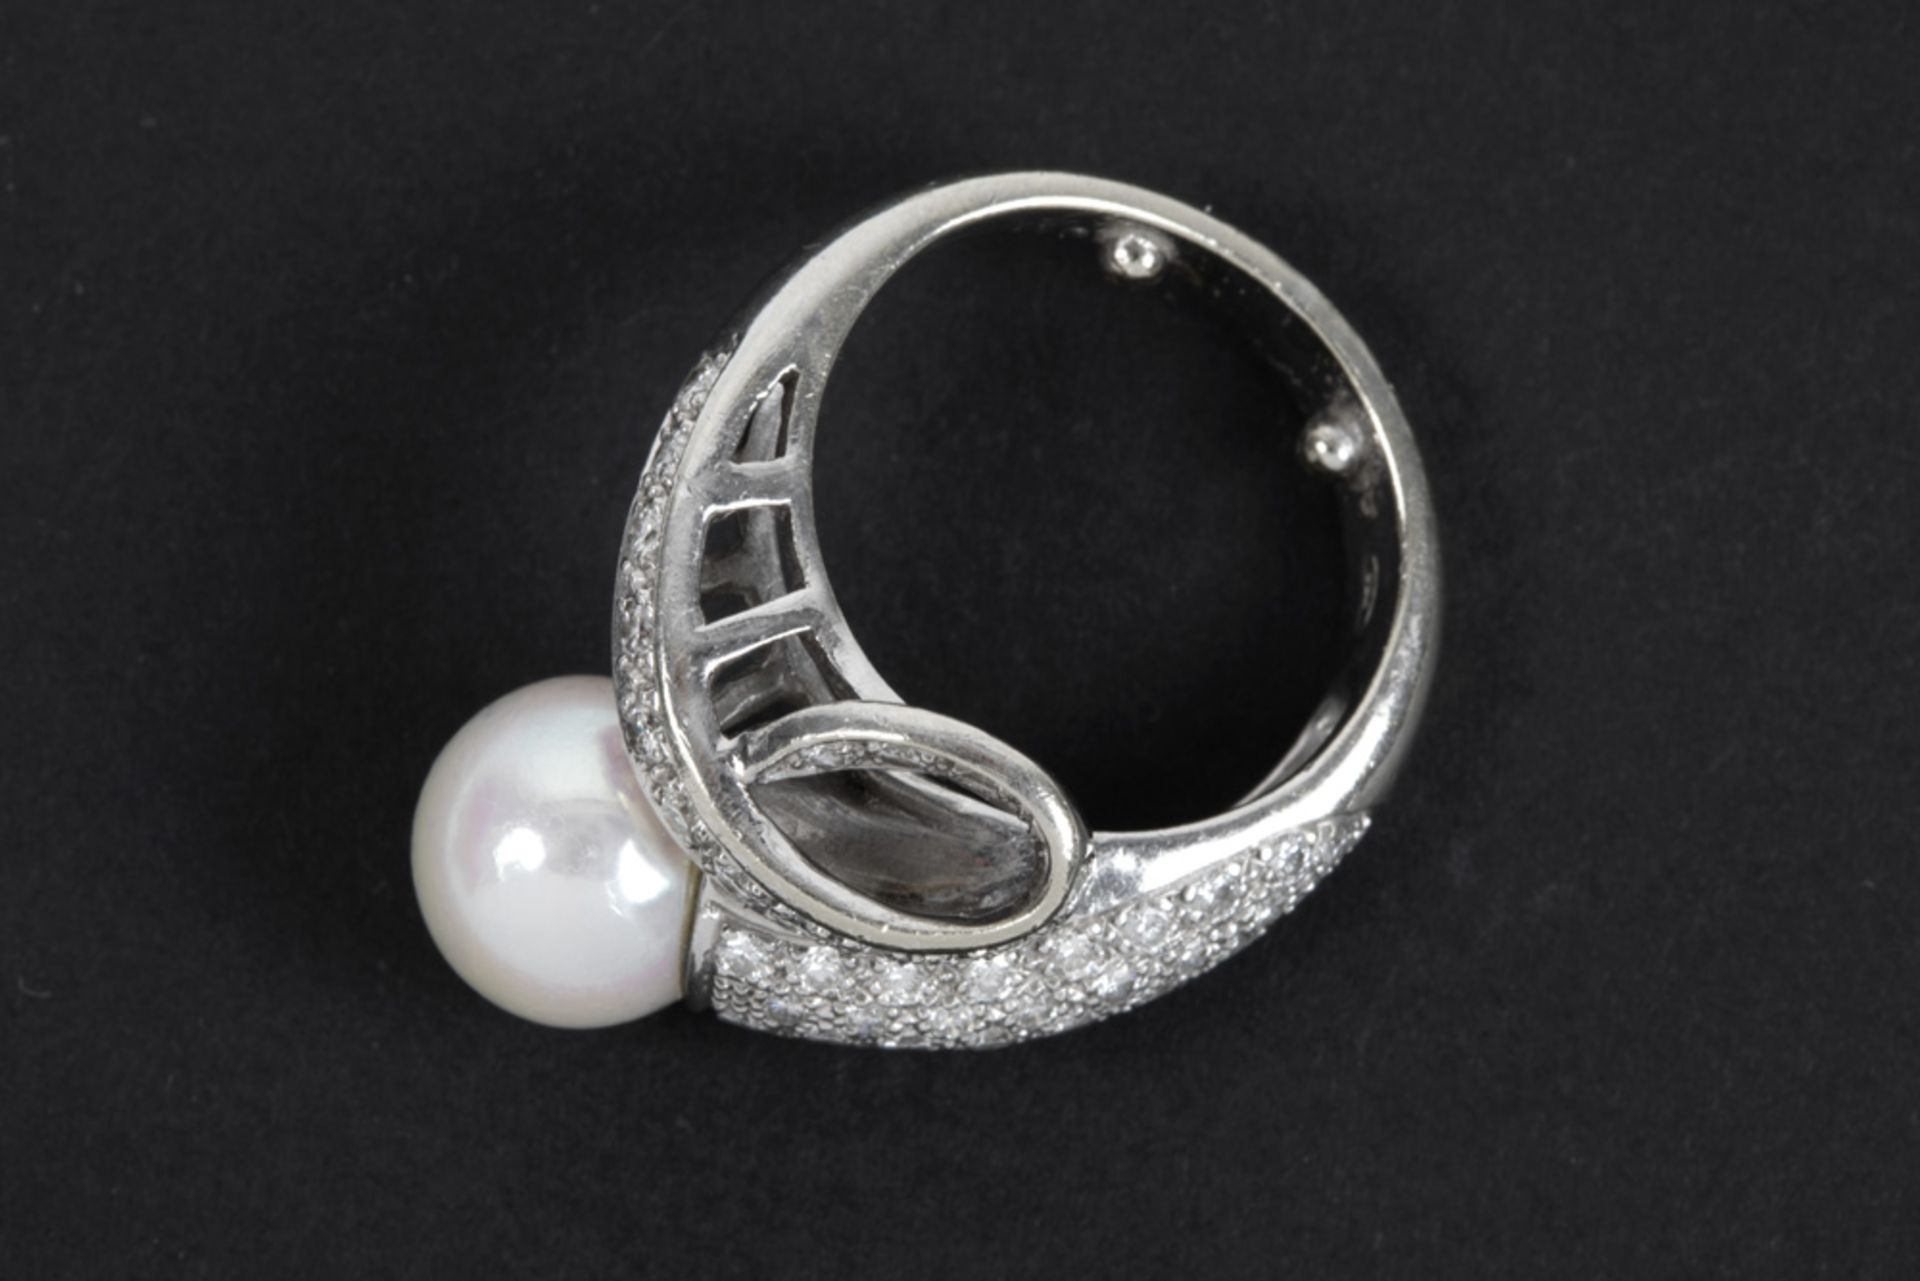 ring in white gold (18 carat) with a snake design with a white pearl as the head and ca 1,20 carat - Image 3 of 3